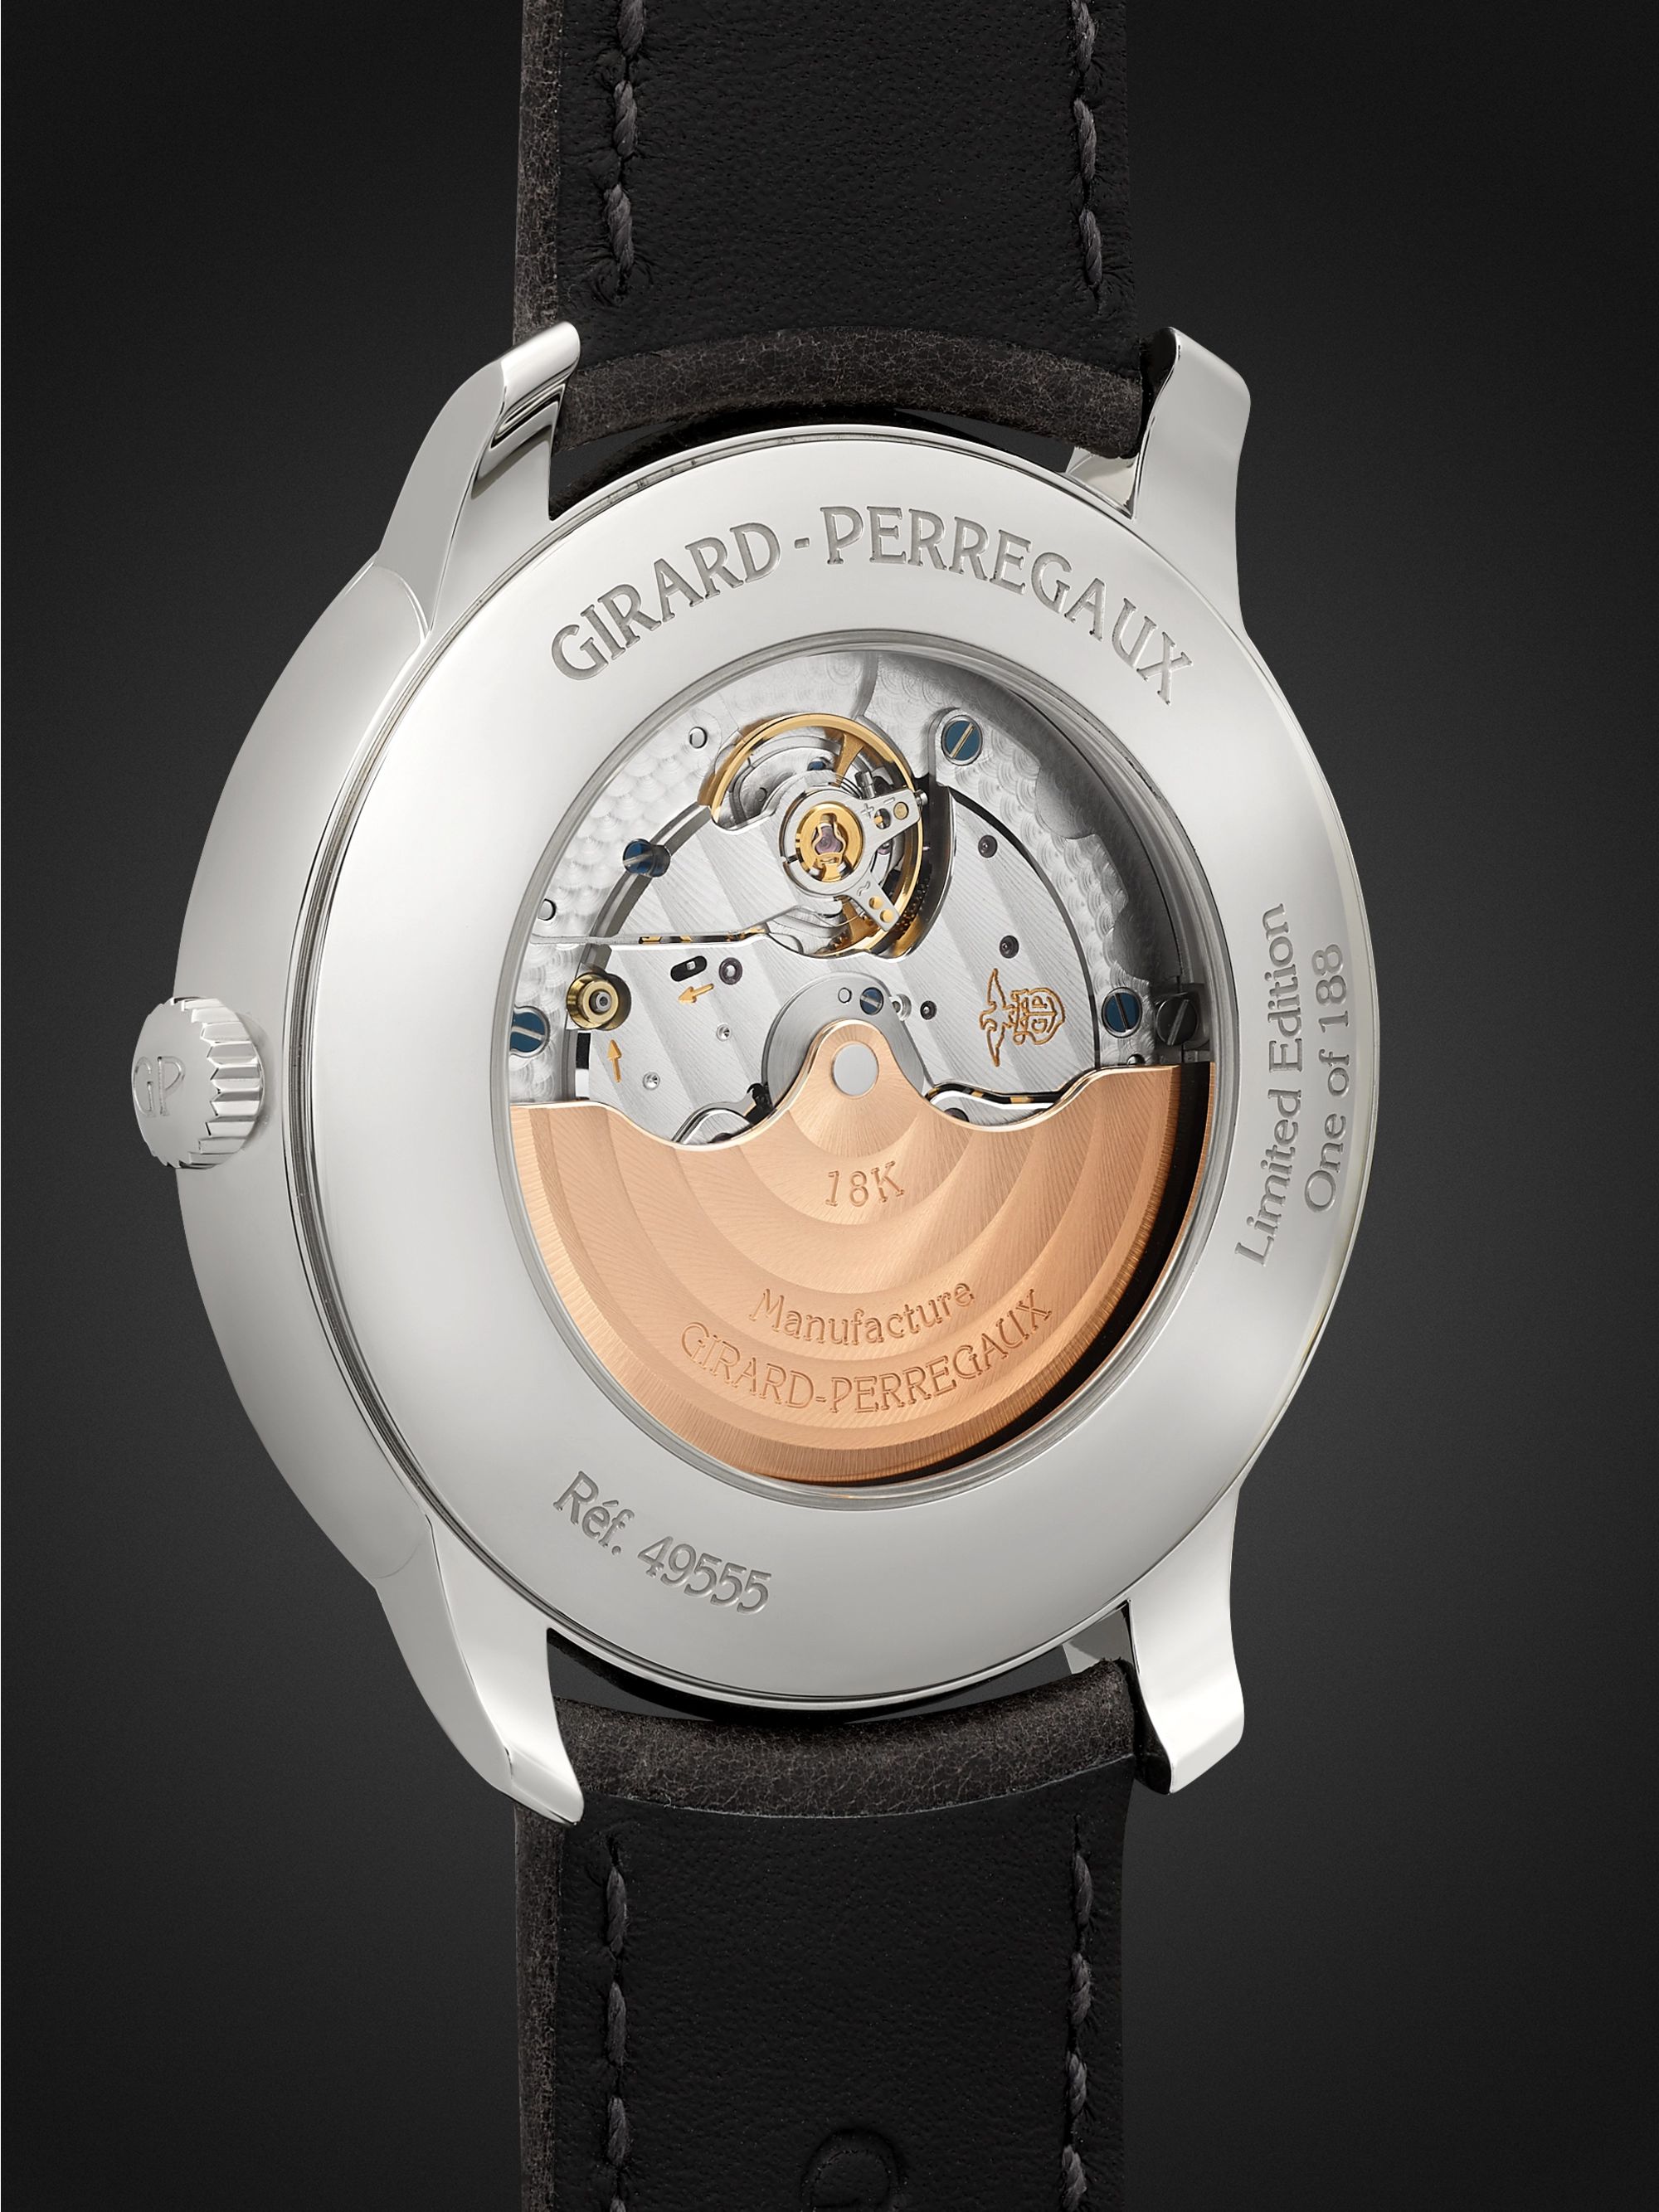 GIRARD-PERREGAUX 1966 Infinity Edition Automatic 40mm Stainless Steel and Leather Watch, Ref. No. 49555-11-632-BB60